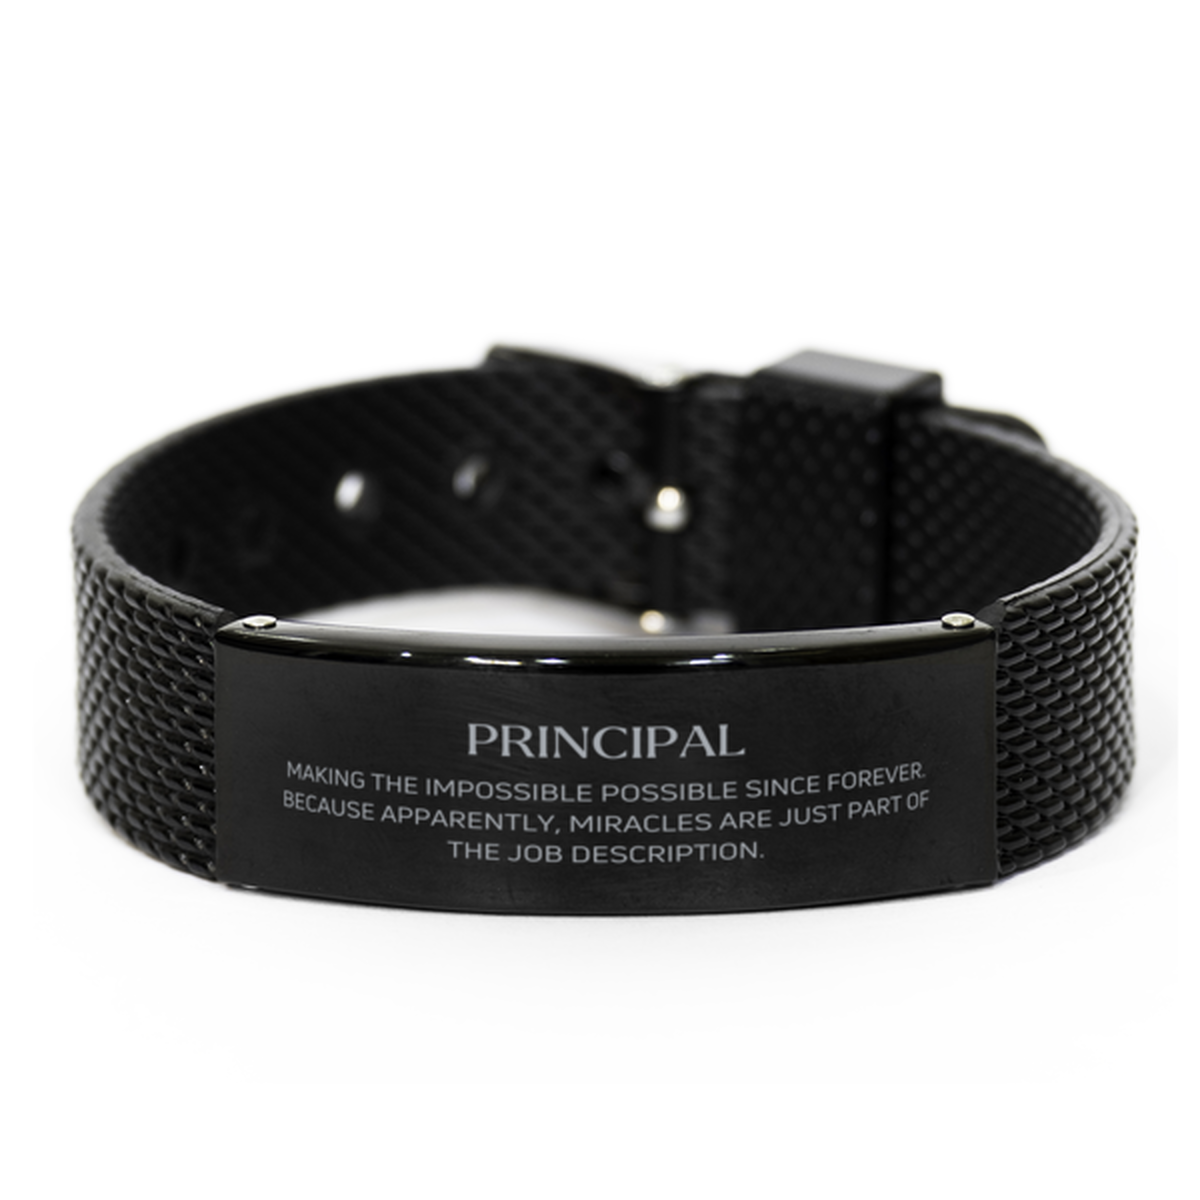 Funny Principal Gifts, Miracles are just part of the job description, Inspirational Birthday Black Shark Mesh Bracelet For Principal, Men, Women, Coworkers, Friends, Boss